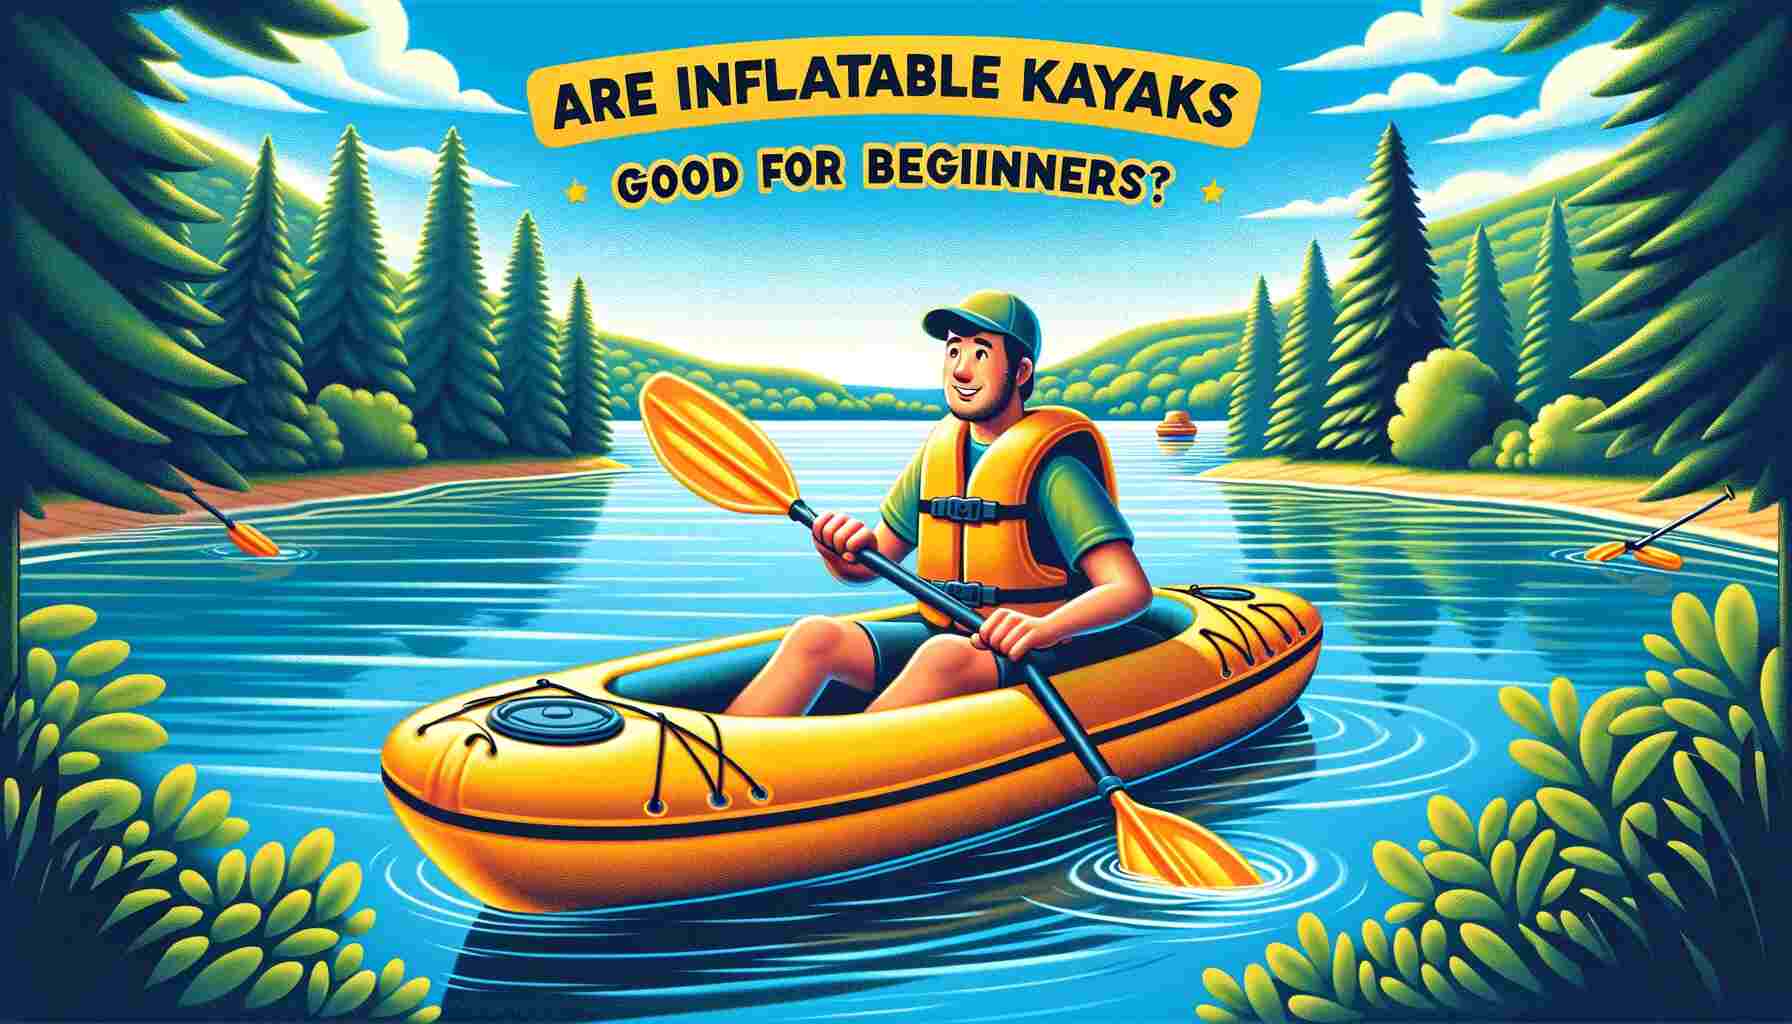 This image features a beginner kayaker in a vibrant yellow inflatable kayak, paddling on a tranquil lake. The kayaker, adorned with a safety vest and helmet, is smiling, highlighting the simplicity and pleasure of kayaking for novices. The backdrop boasts a lush, green landscape with a few trees and a clear, blue sky, underscoring the allure of nature and the delight of engaging in this outdoor activity. The scene conveys a sense of adventure, accessibility, and safety, perfect for those new to kayaking.